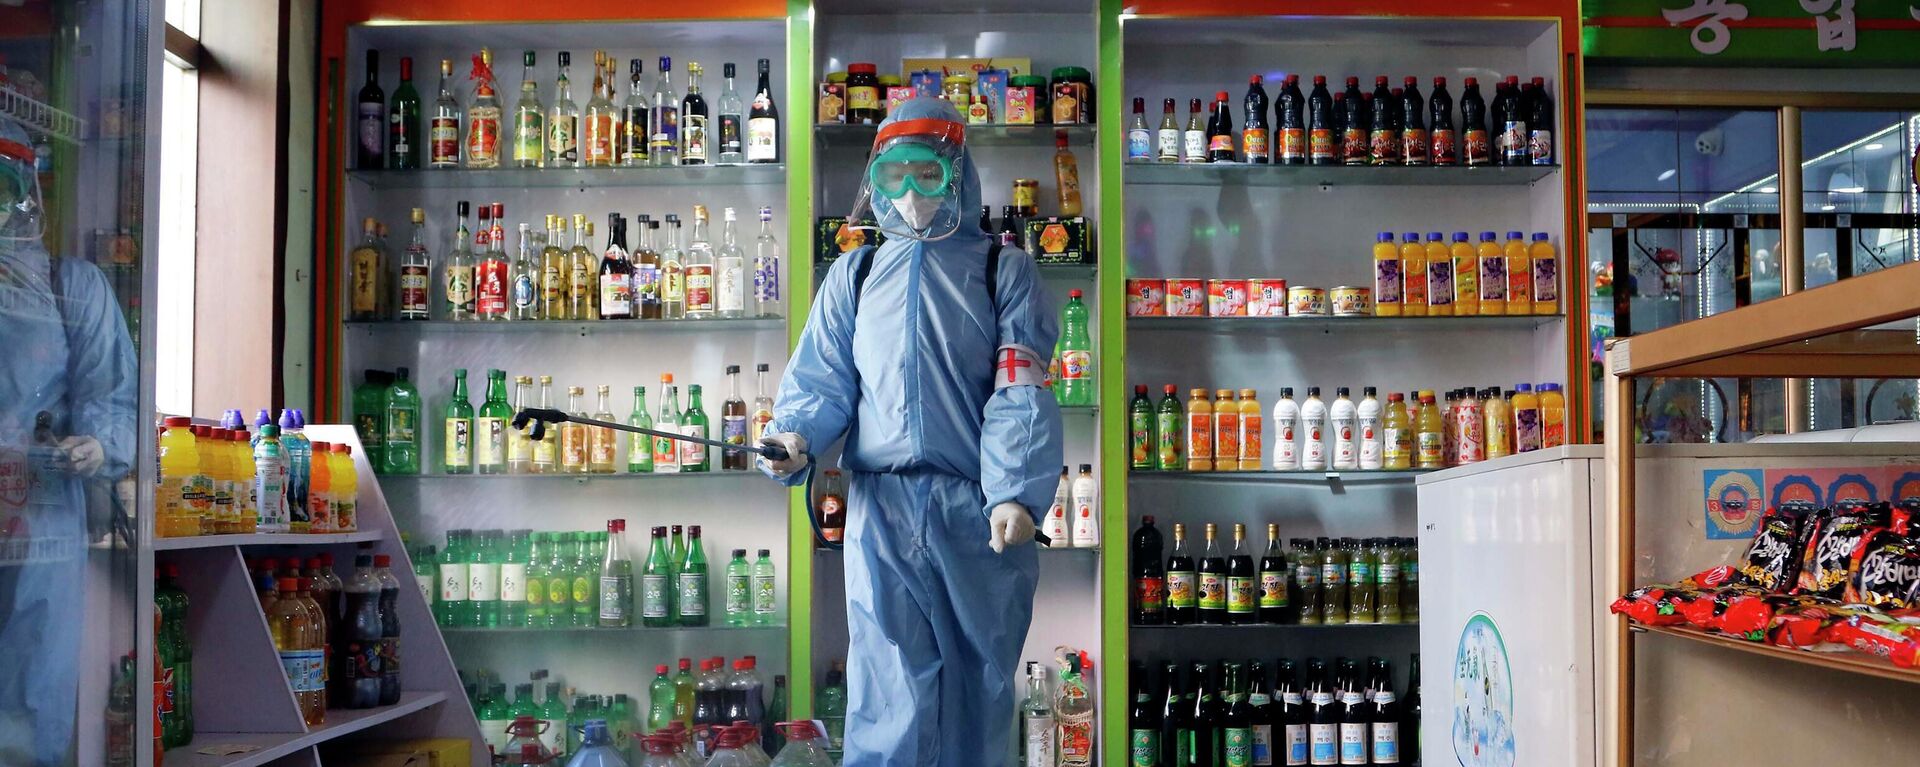 FILE - An employee of the Kyonghung Foodstuff General Store disinfects the showroom in Pyongyang, North Korea, Wednesday, Nov. 10, 2021. Before acknowledging domestic COVID-19 cases, Thursday, May 12, 2022, North Korea spent 2 1/2 years rejecting outside offers of vaccines and steadfastly claiming that its superior socialist system was protecting its 26 million people from “a malicious virus” that had killed millions around the world. - Sputnik International, 1920, 11.08.2022